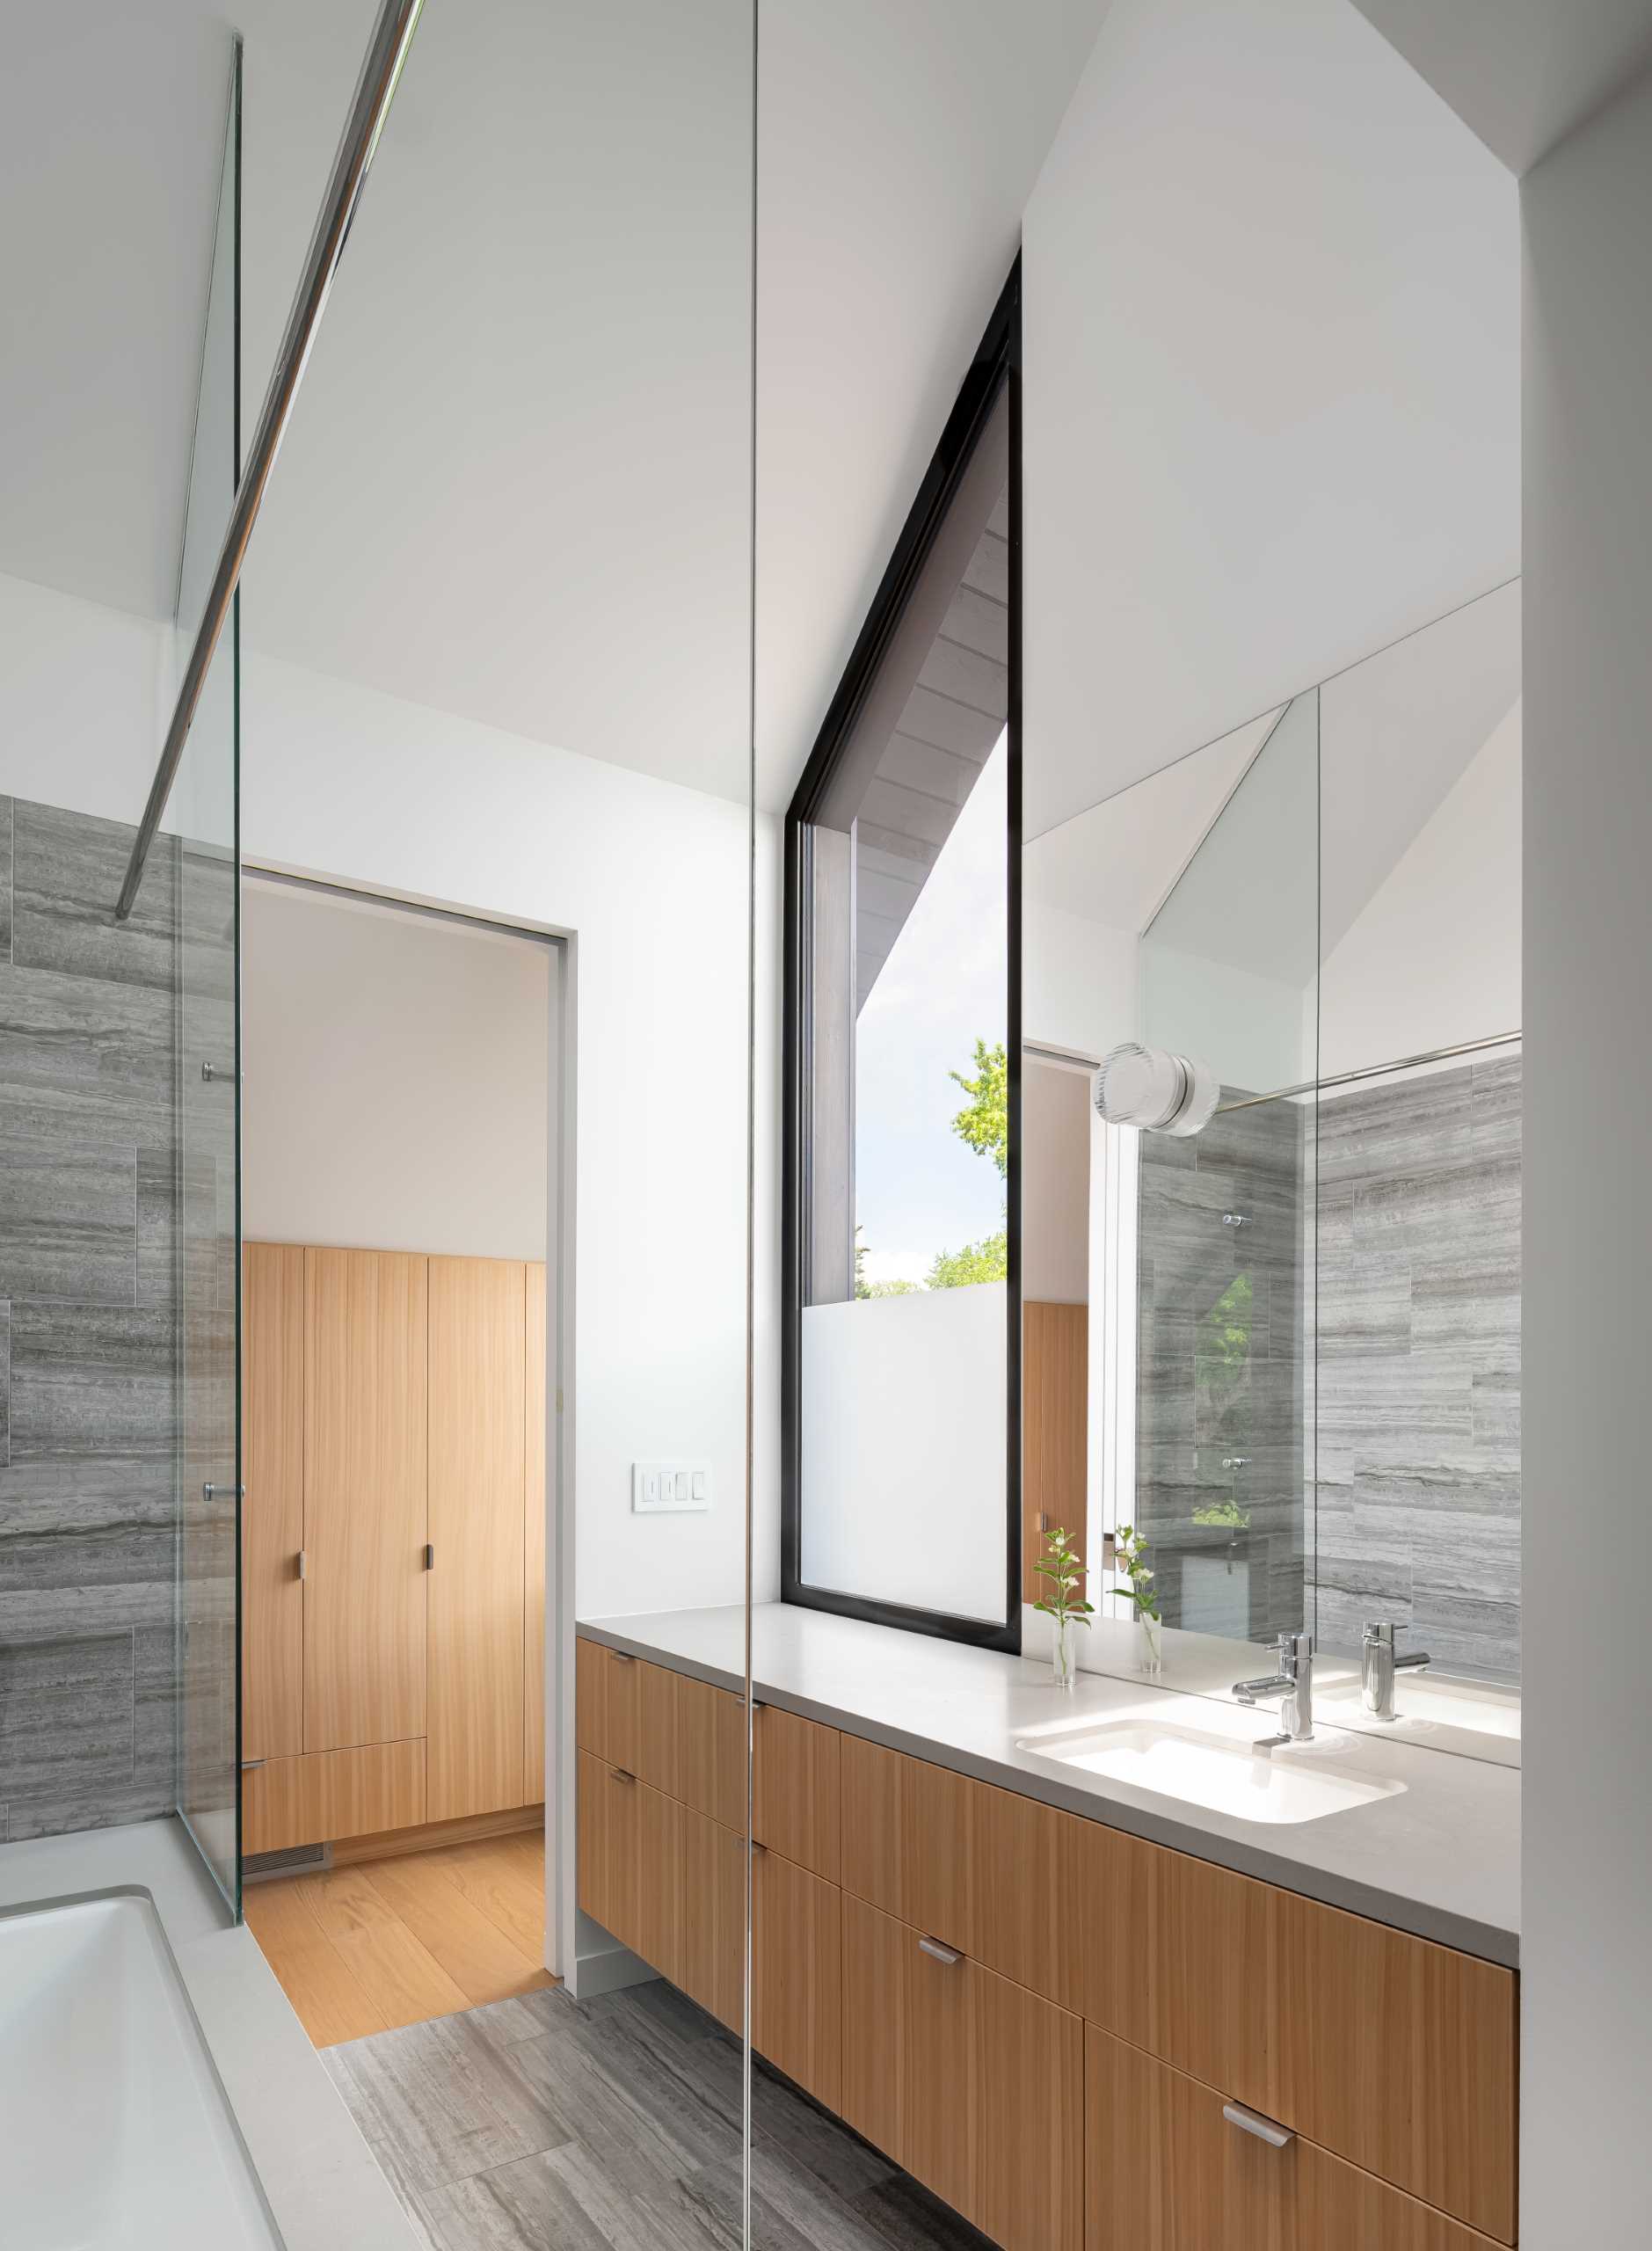 A modern bathroom with a high ceiling and window that matches the angle of the roof, as well as a built-in bathtub and a walk-in closet. 